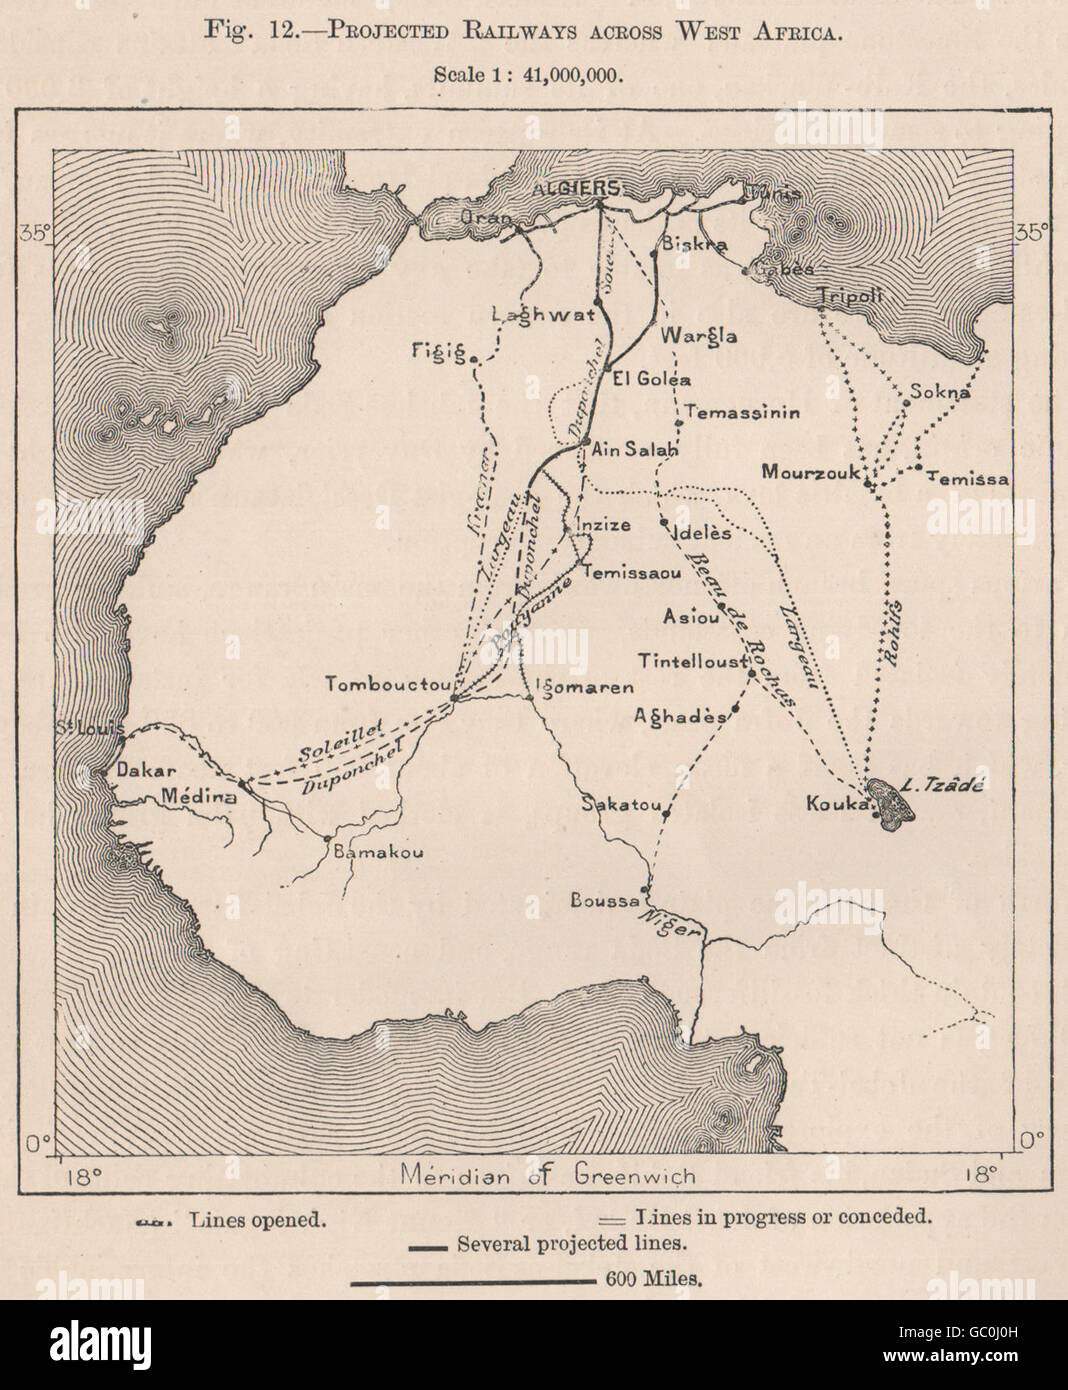 Projected Railways across West Africa, 1885 antique map Stock Photo